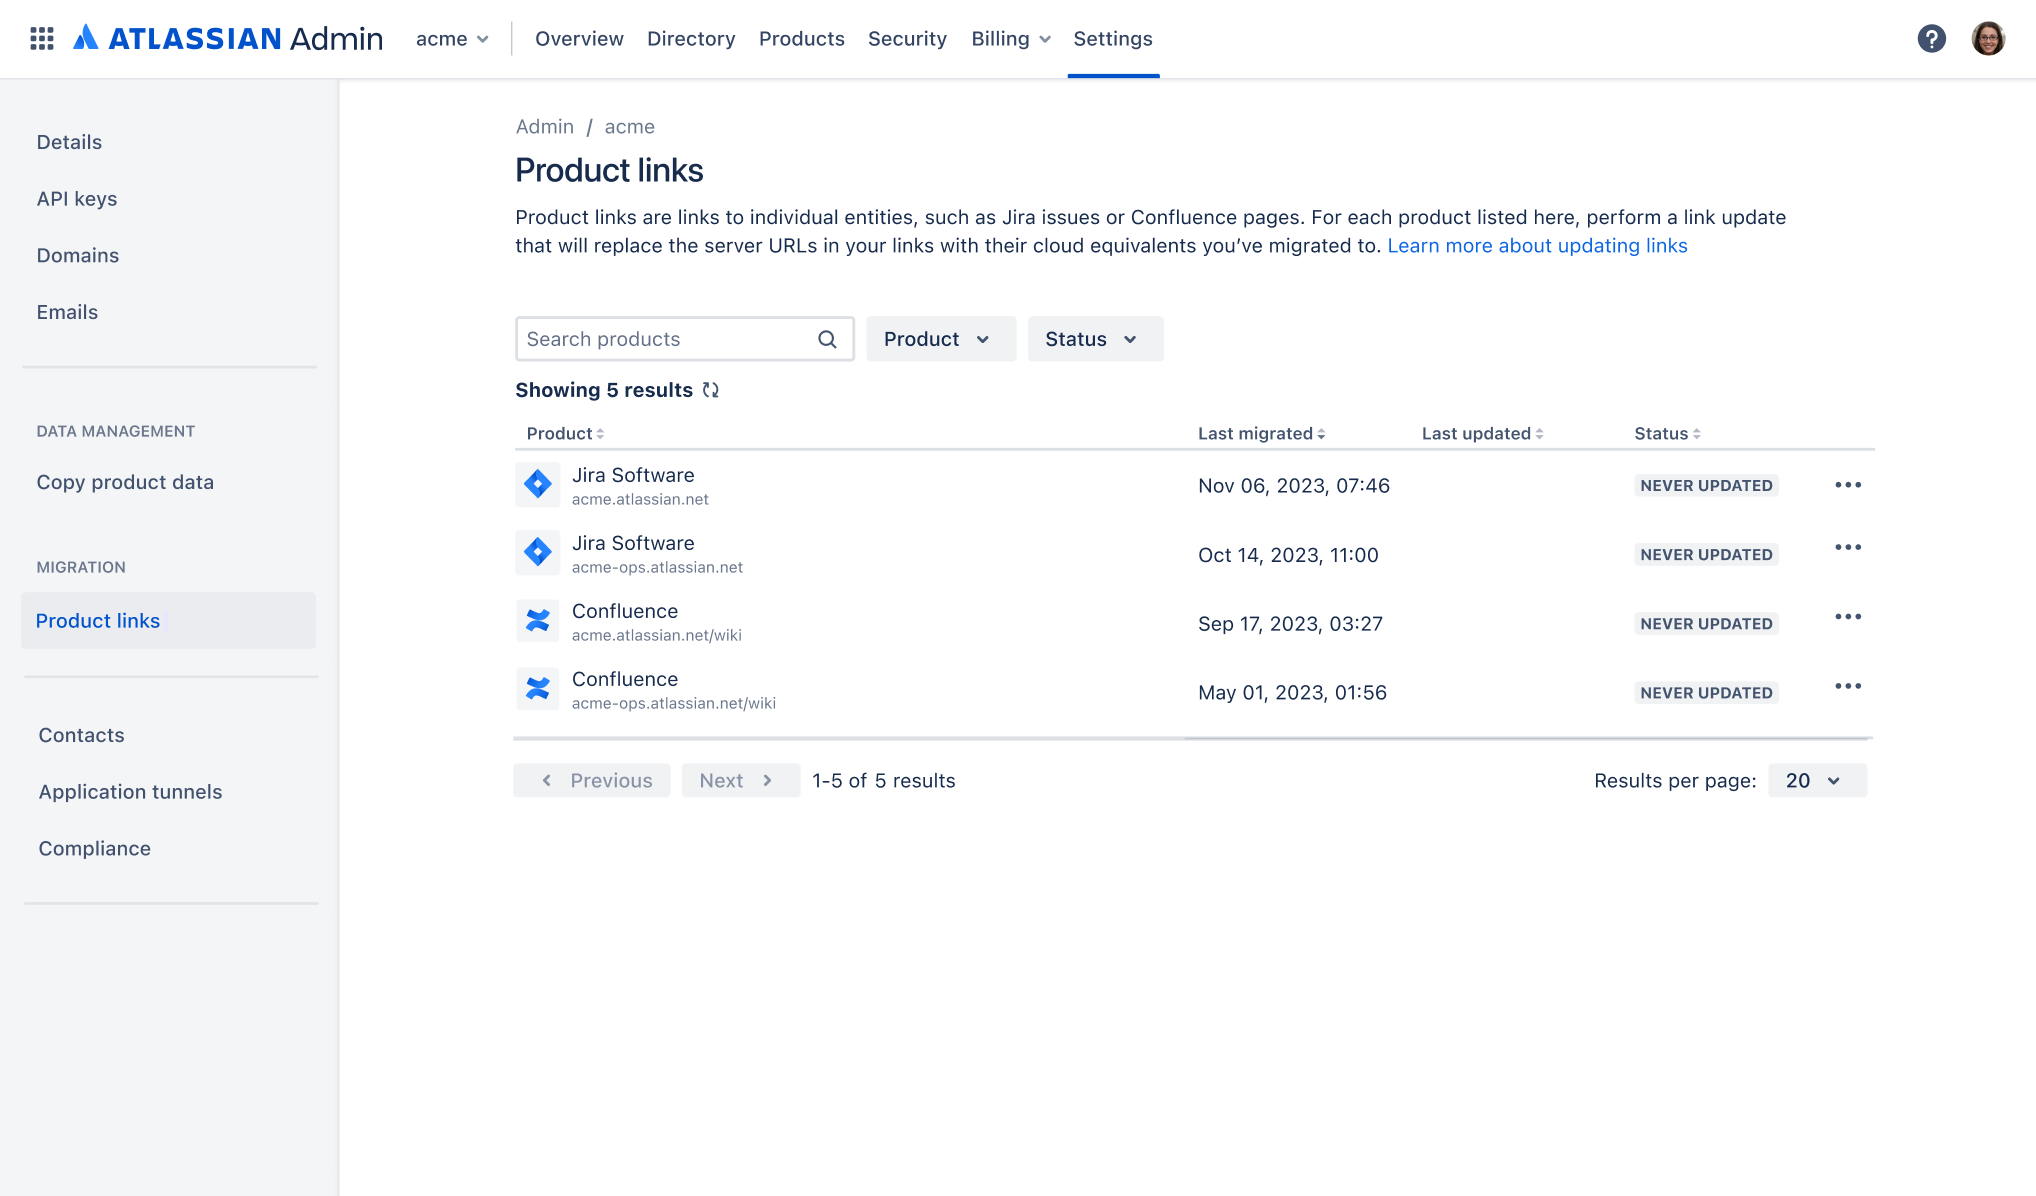 Landing page of product links in admin.atlassian.com